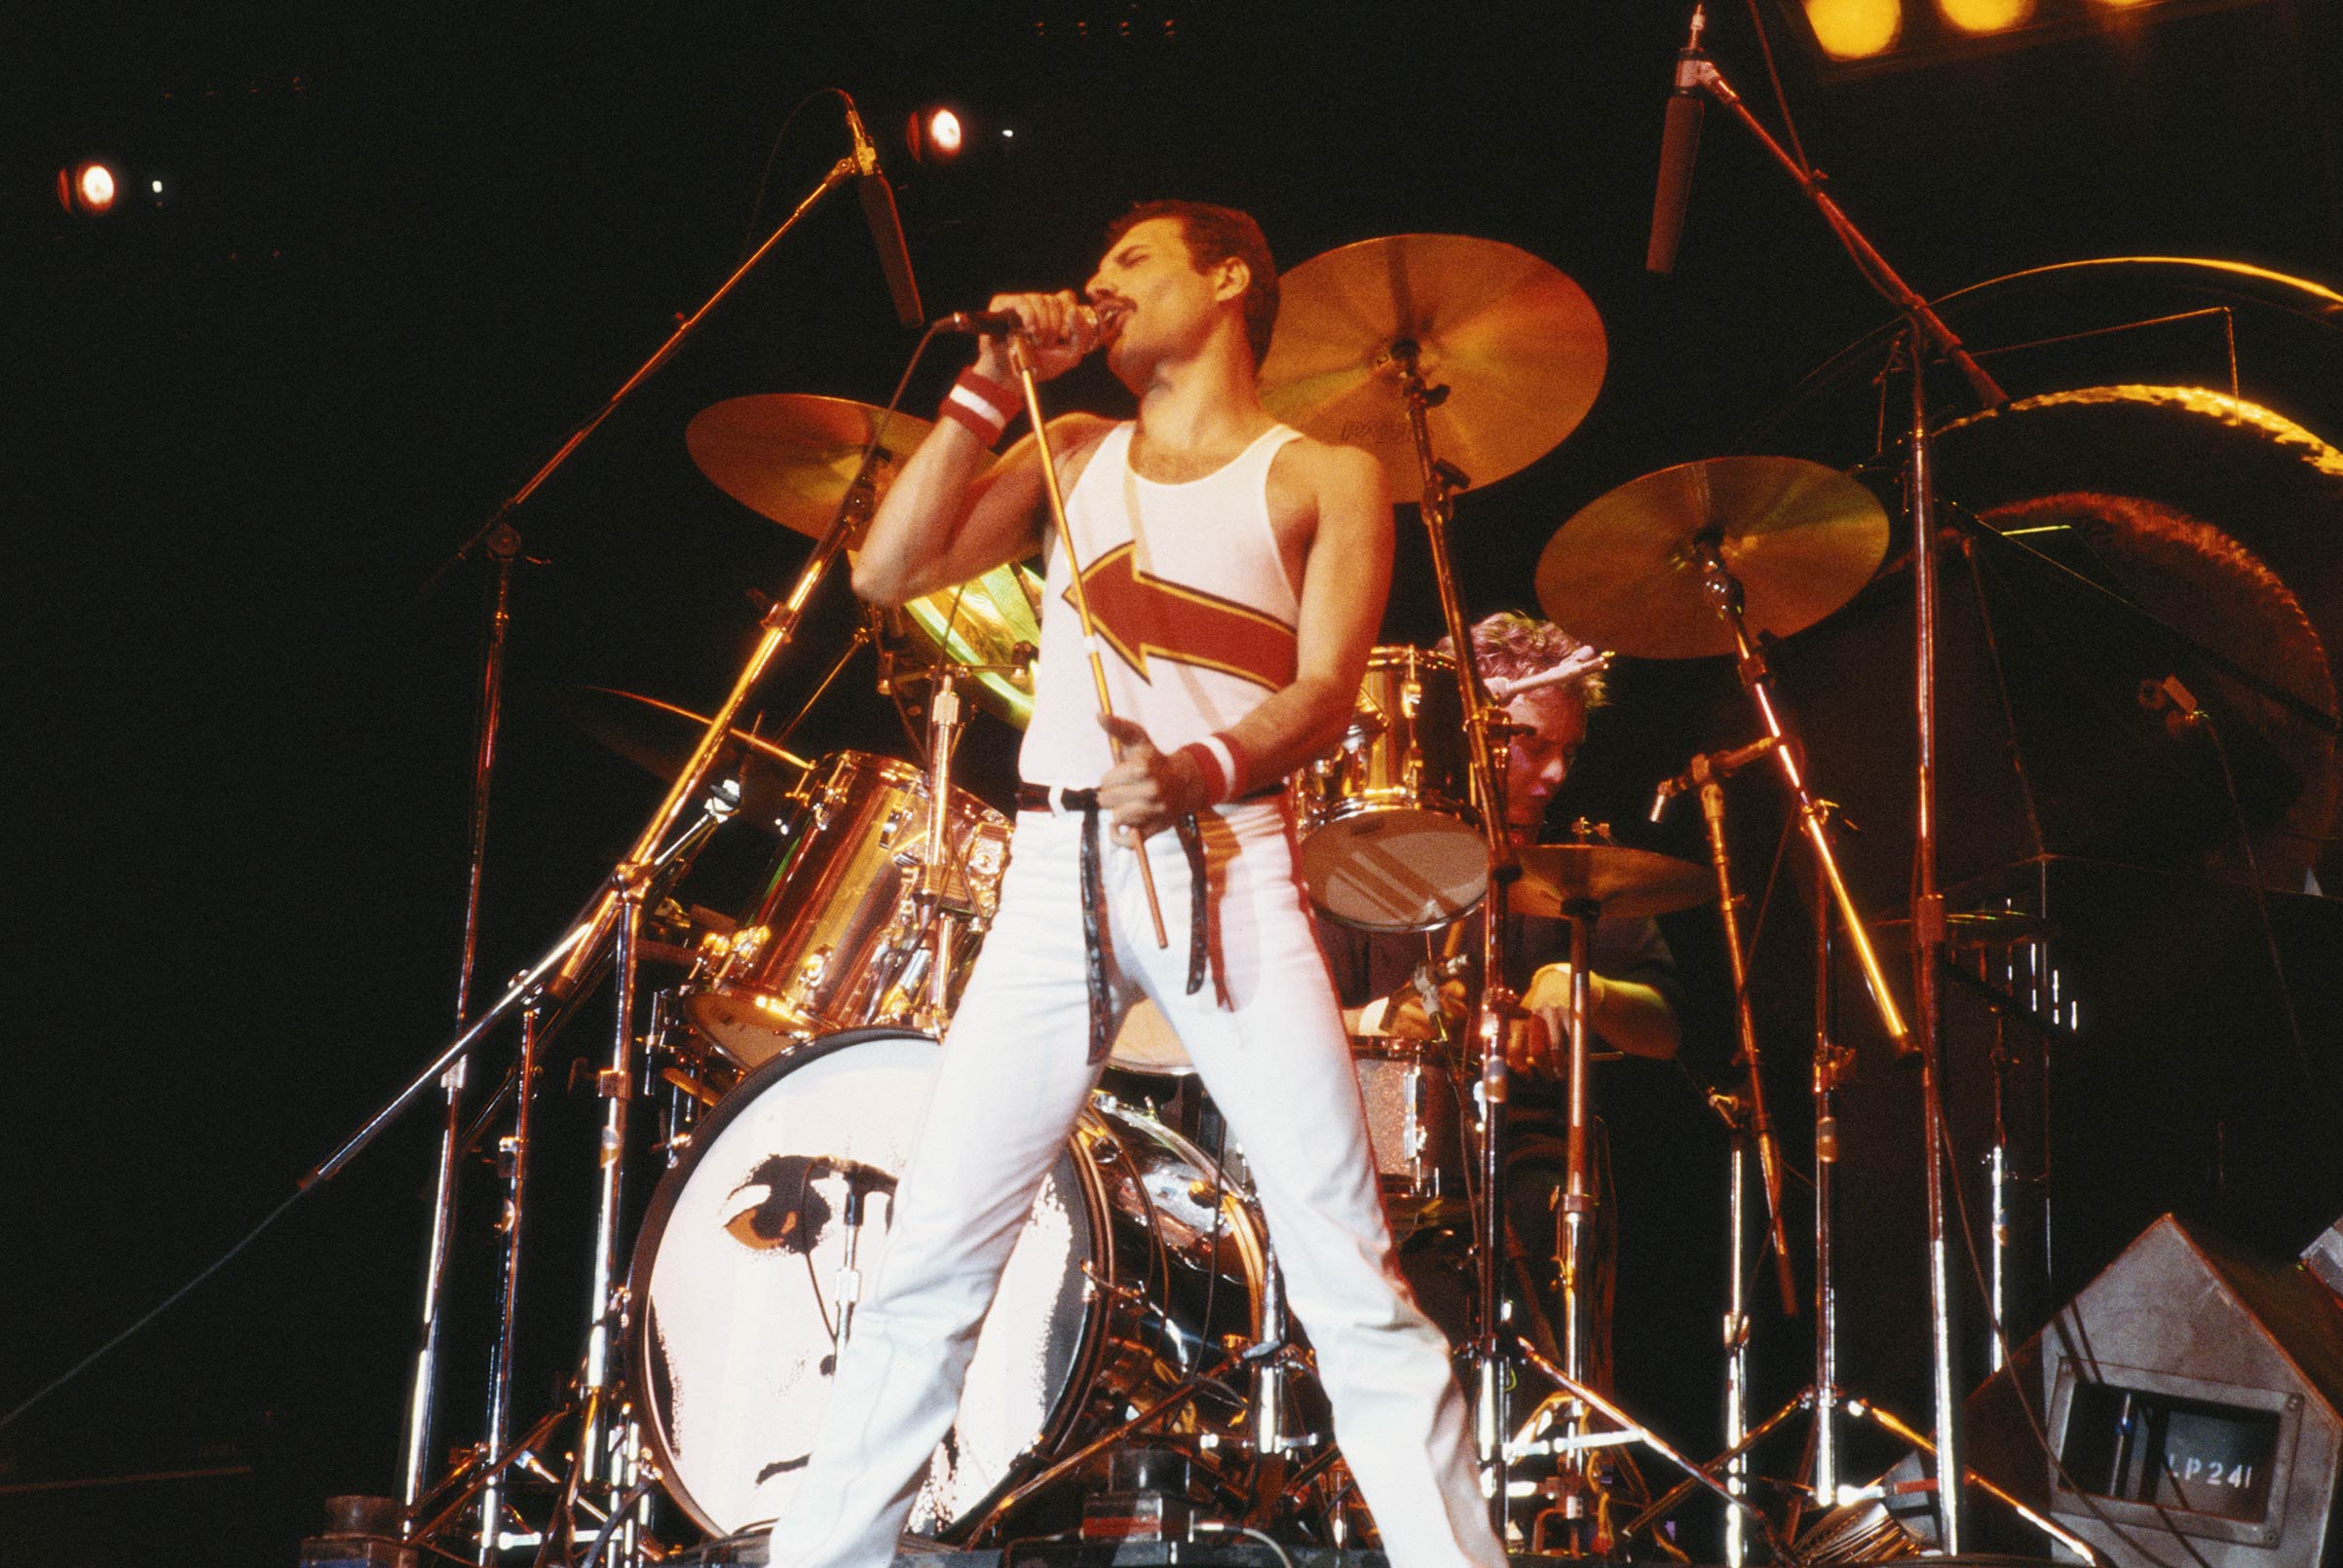 Queen singer Freddie Mercury performing at the band's concert at the National Bowl in Milton Keynes, England, on Jun. 5, 1982. (Fox Photos/Hulton Archive—Getty Images)